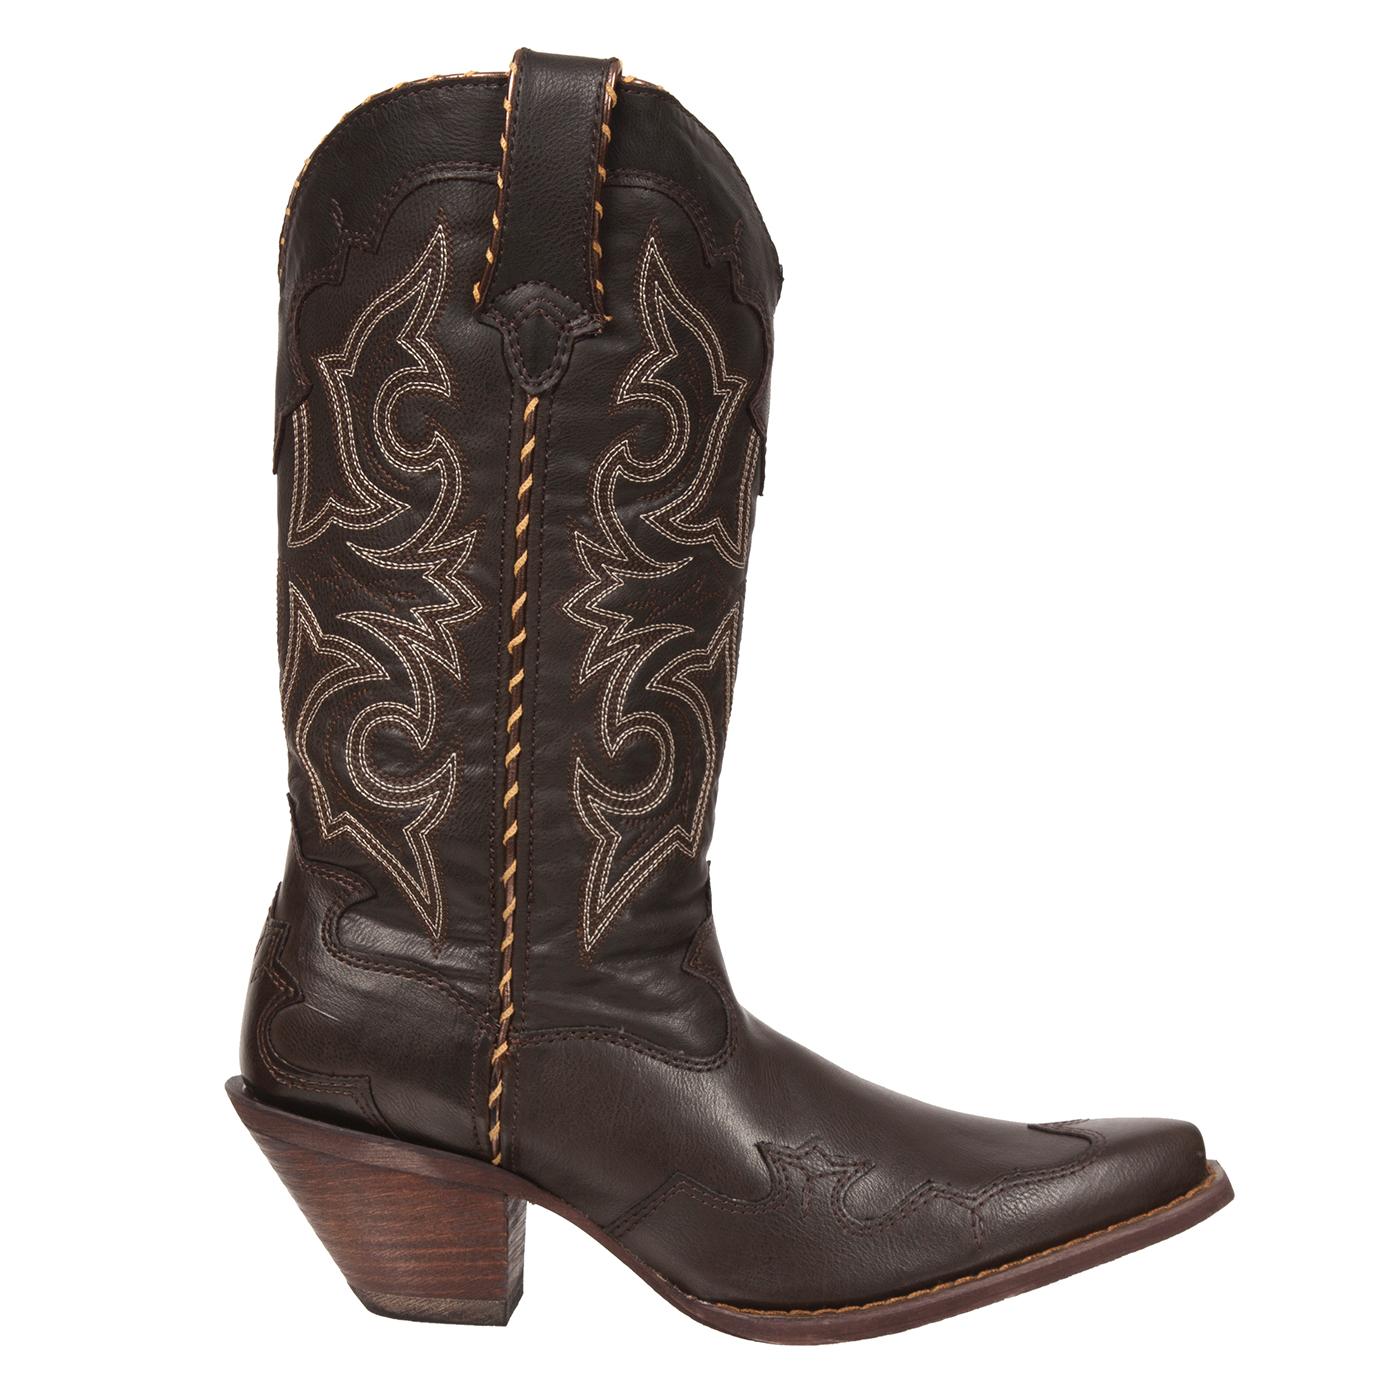 Women's Boots: Crush by Durango Western Boots, #RD5513